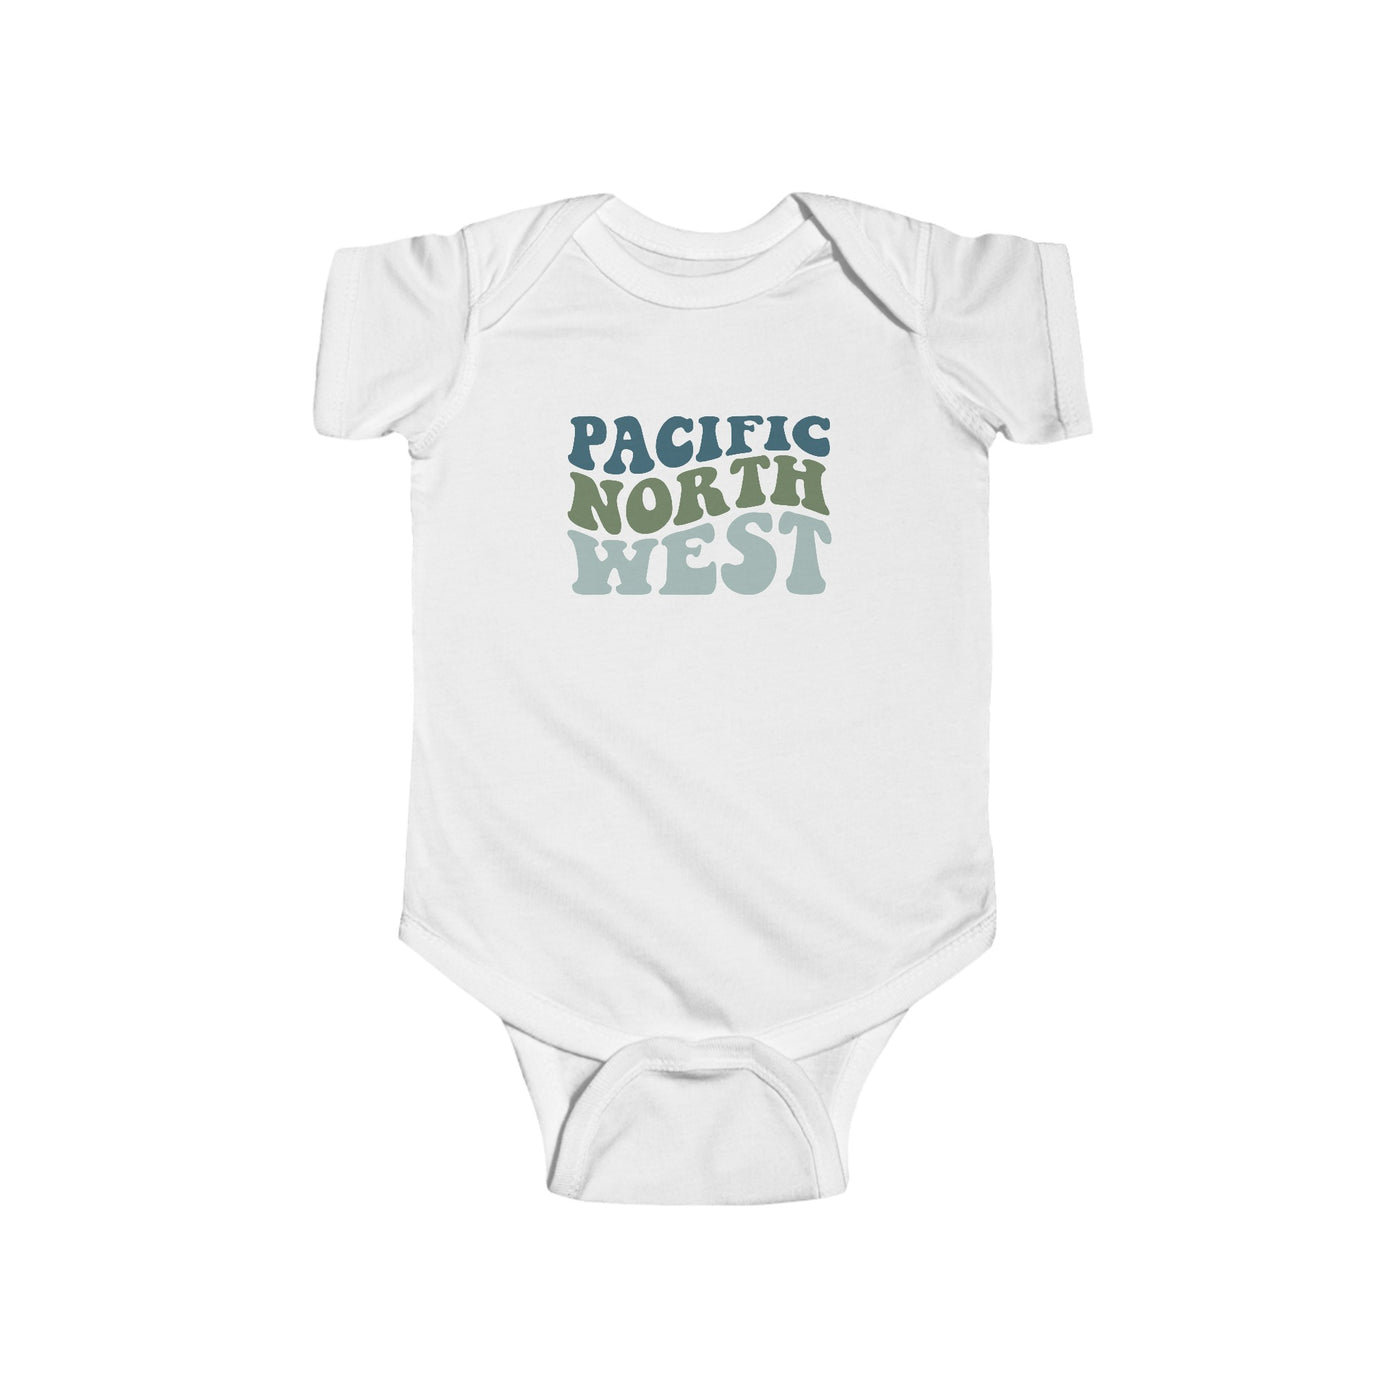 Pacific North West Baby Bodysuit